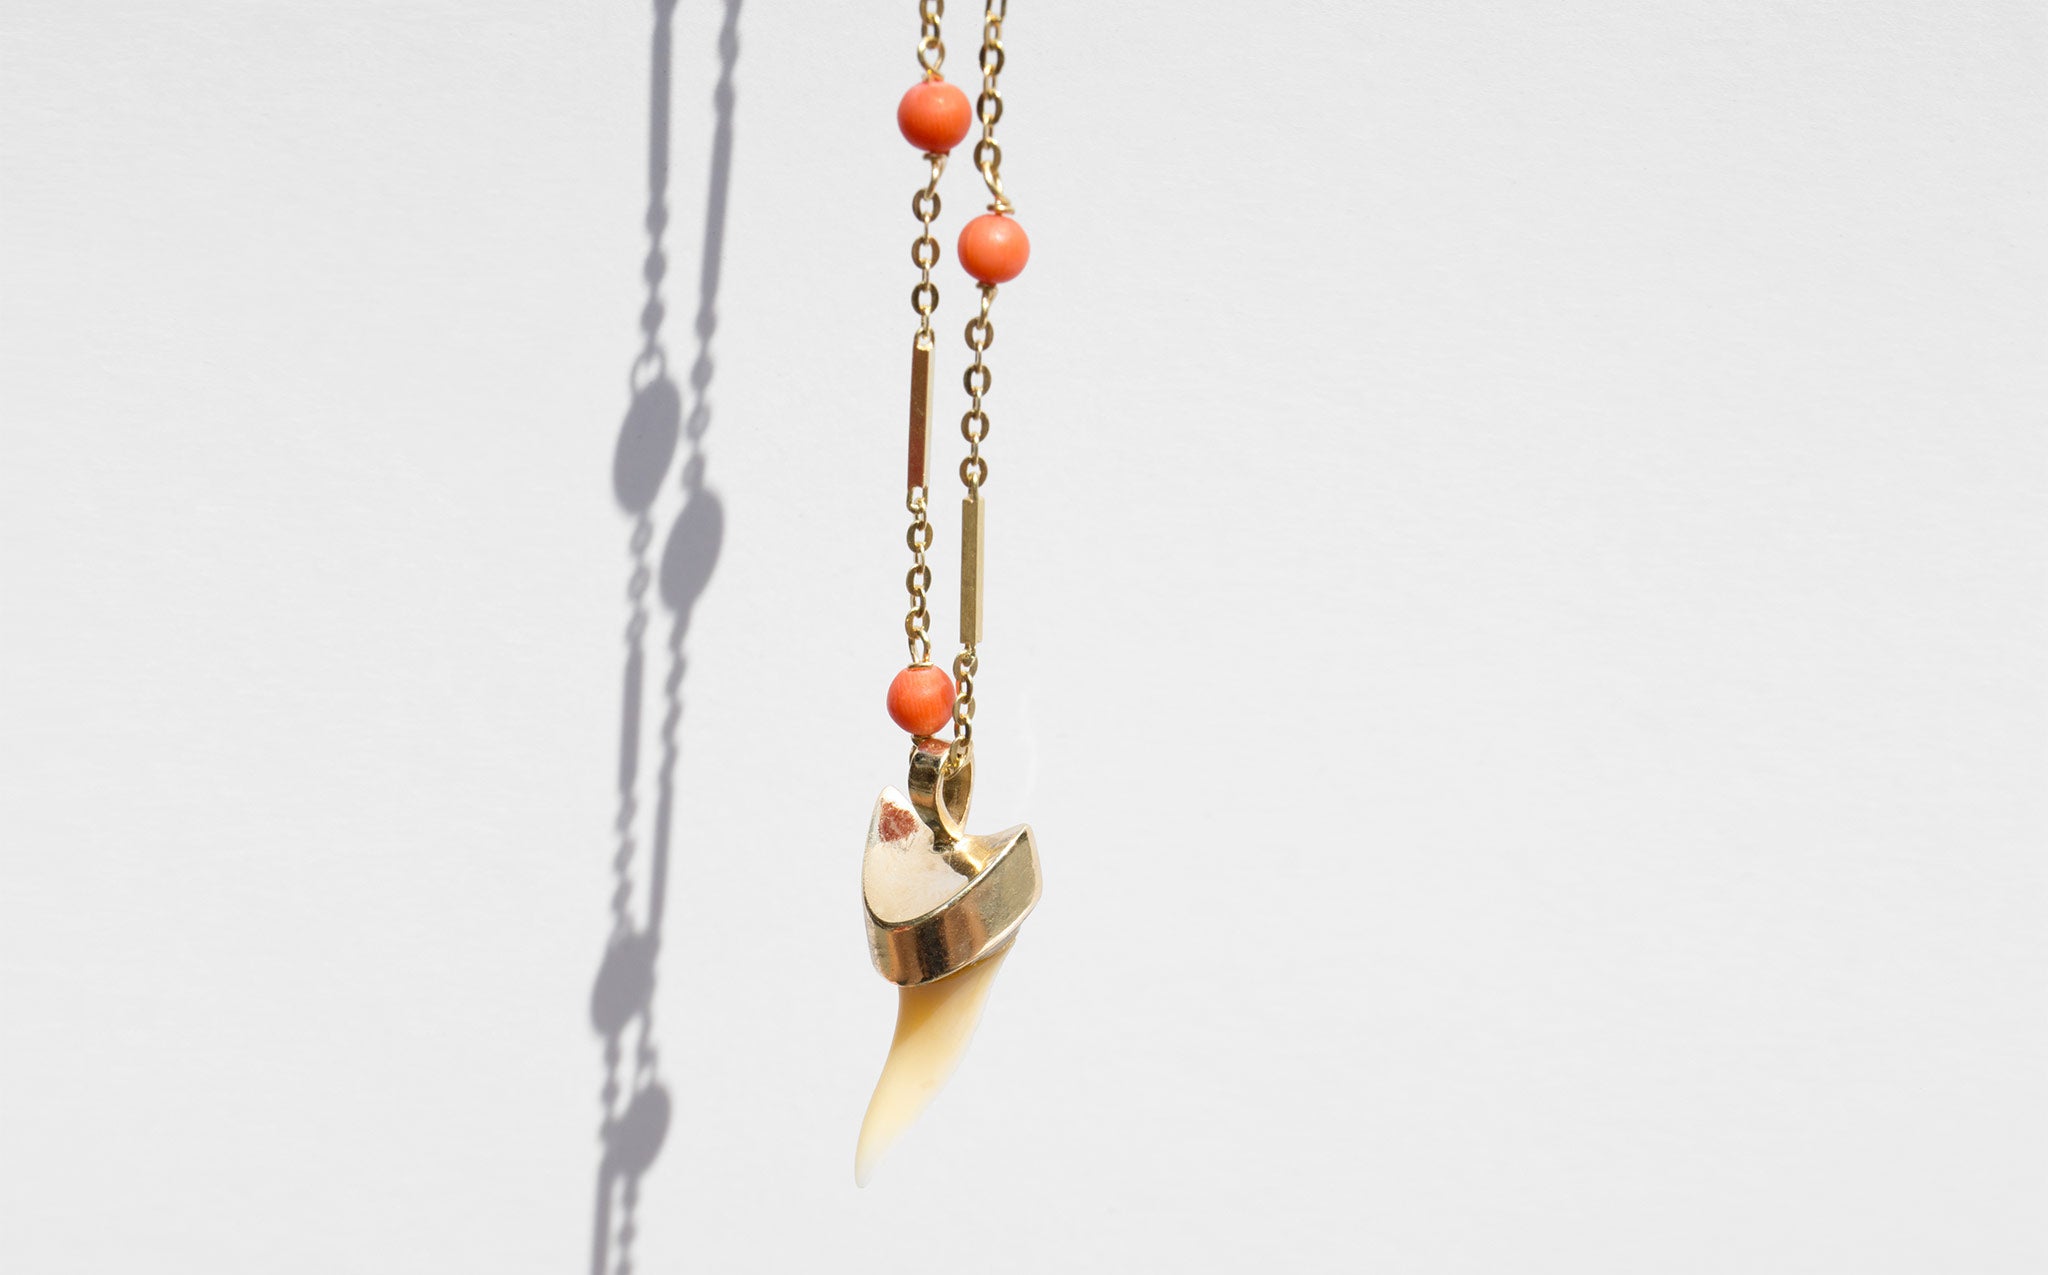 Shark Tooth and Coral Necklace